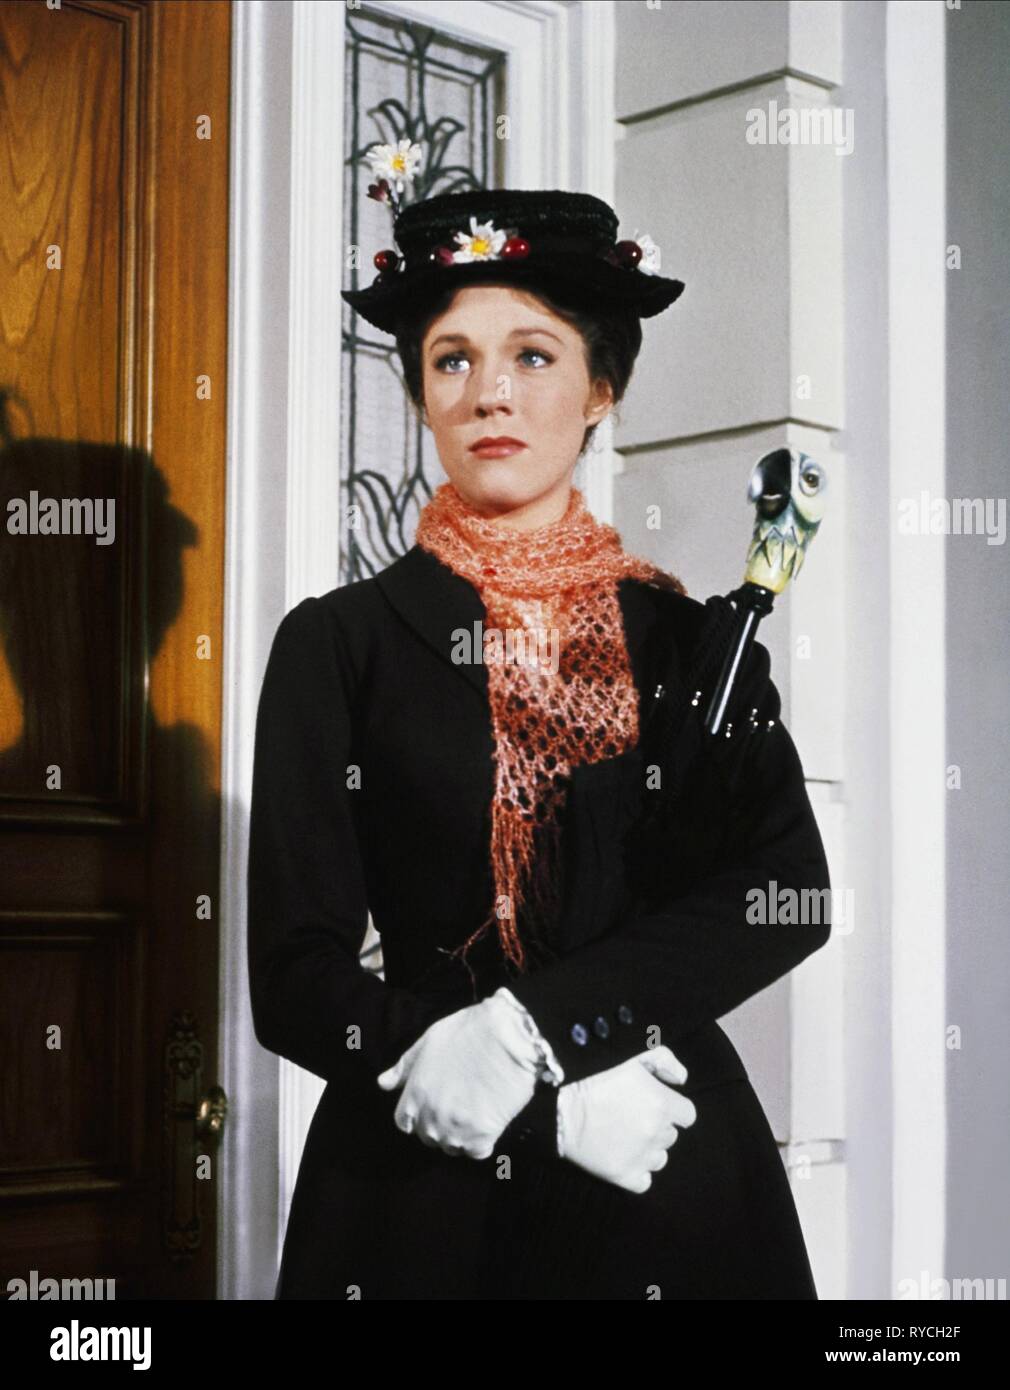 JULIE ANDREWS, MARY POPPINS, 1964 Stock Photo - Alamy